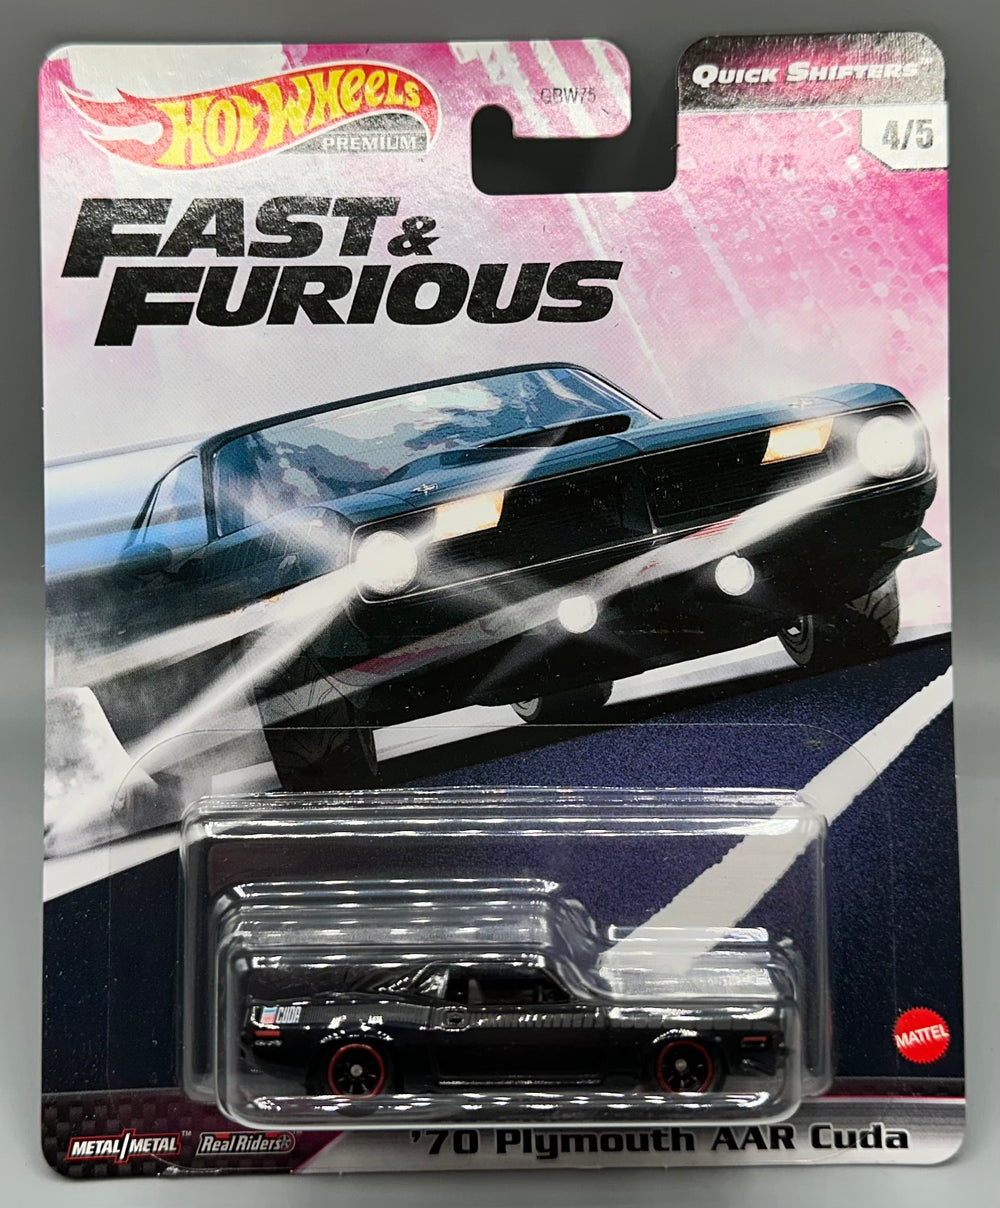 Hot Wheels Fast & Furious Quick Shifters '70 Plymouth AAR Cuda